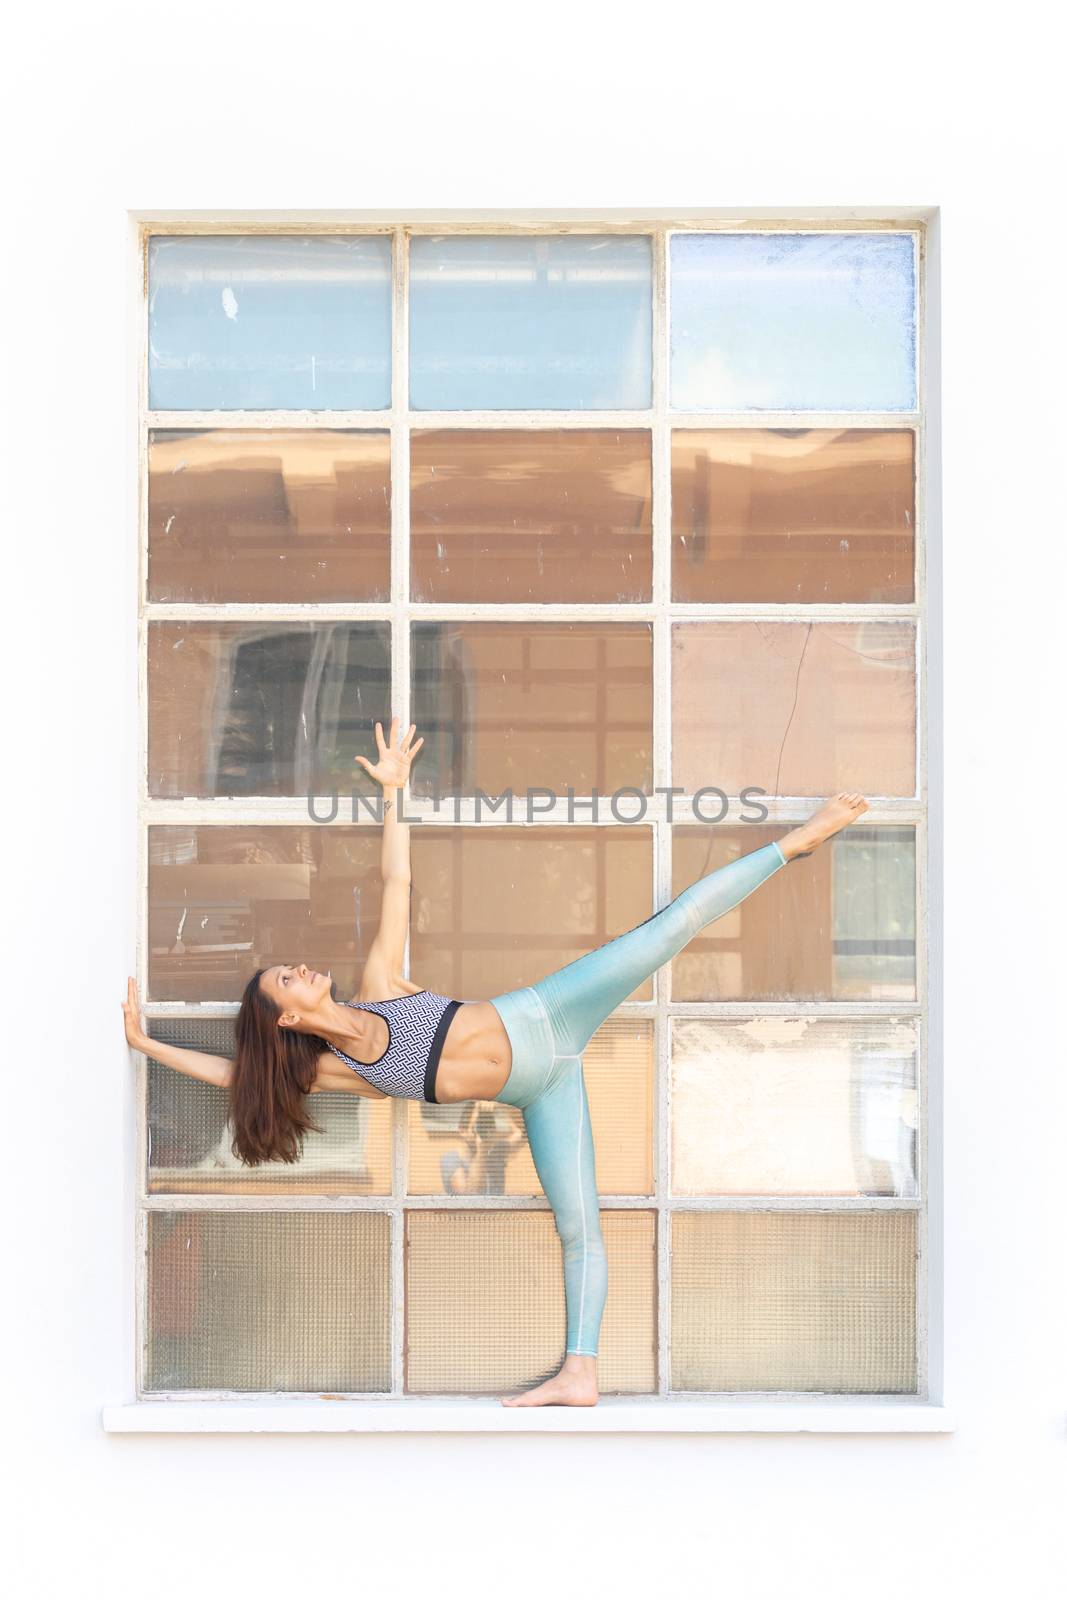 Fit sporty active girl in fashion sportswear doing yoga fitness exercise in front of big industrial window frame. colorful reflections in window glass. Outdoor sports, urban style yoga.